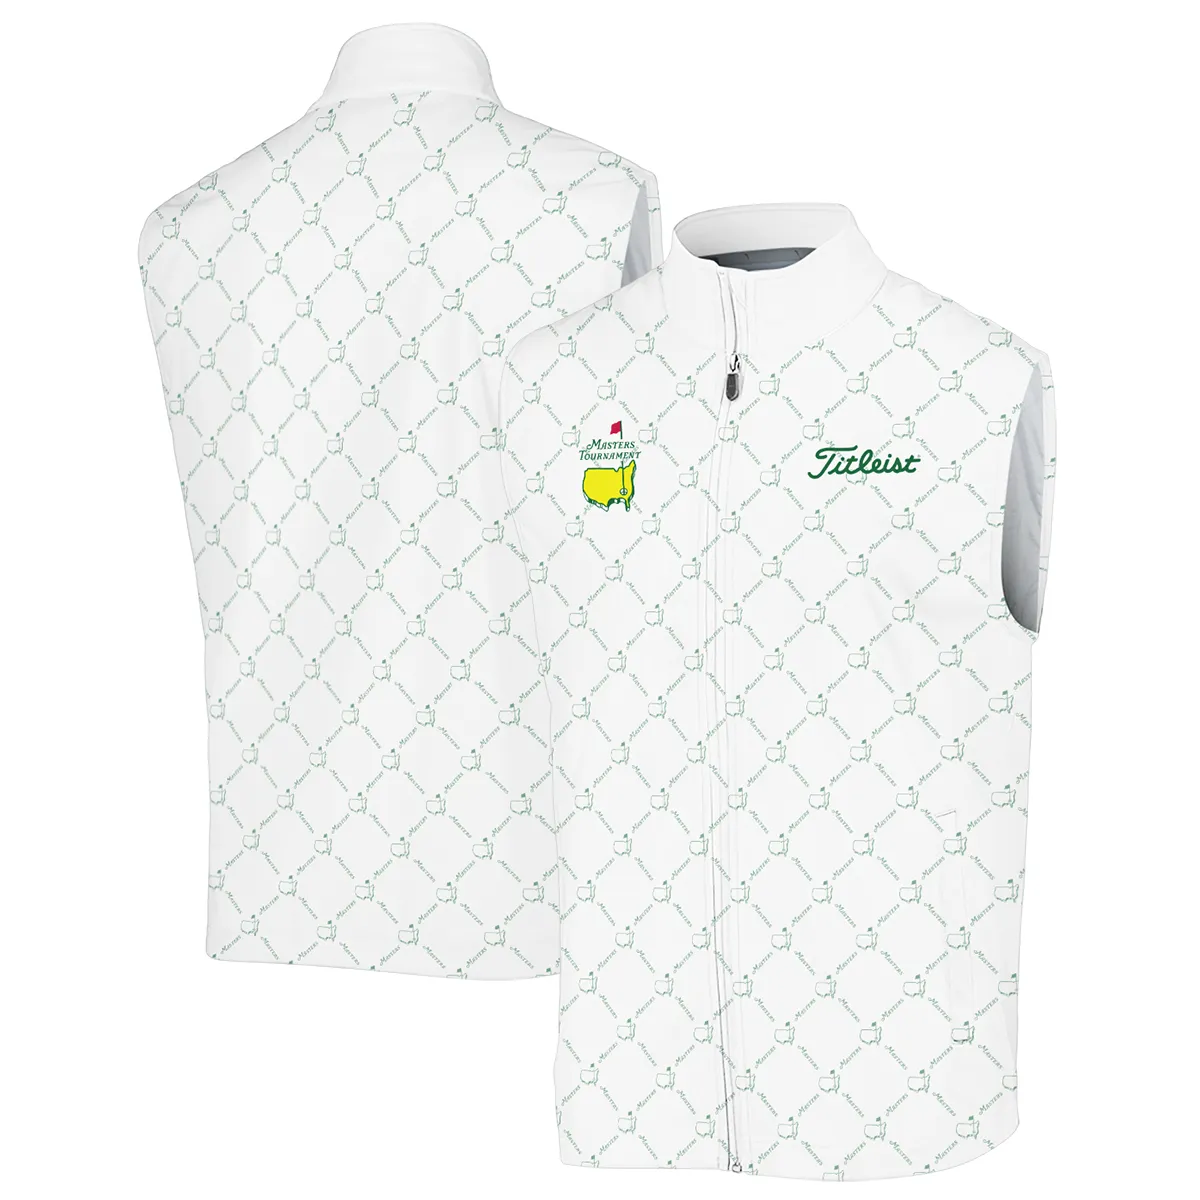 Golf Sport Pattern Color White Mix Masters Tournament Titleist Sleeveless Jacket Style Classic